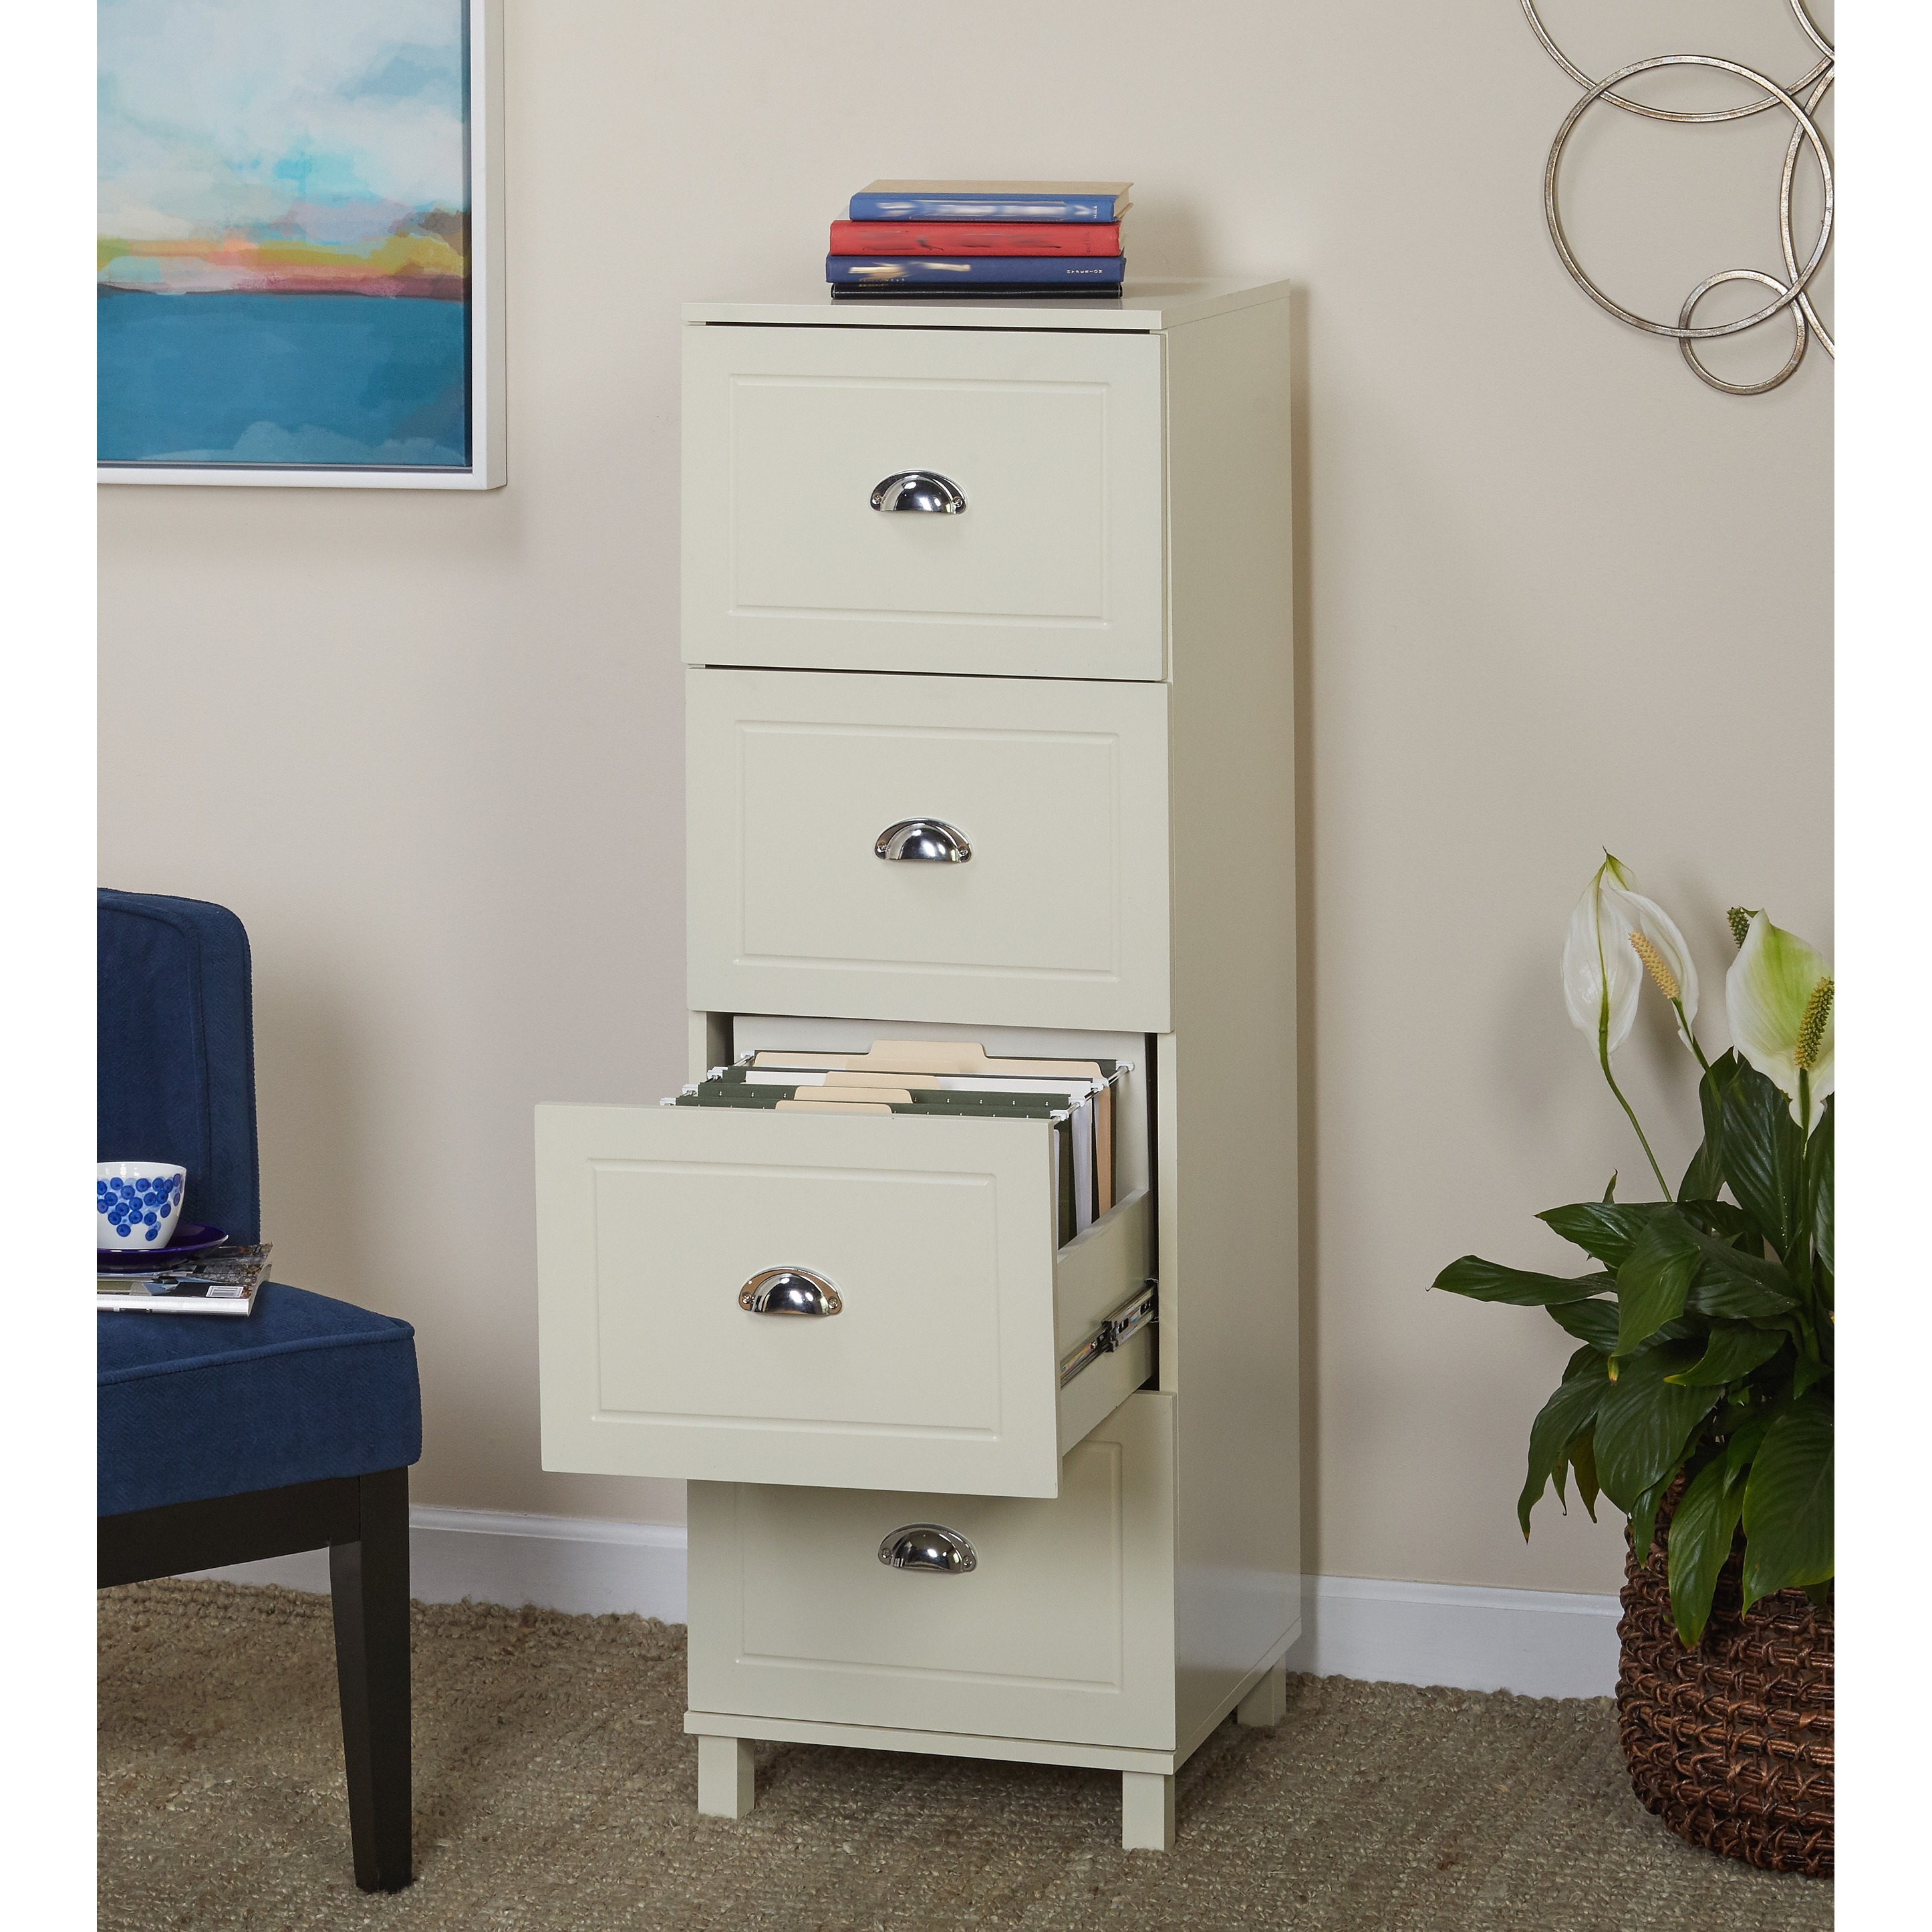 Bradley 4 Drawer Vertical Wood Filing Cabinet White Walmart throughout proportions 2891 X 2891